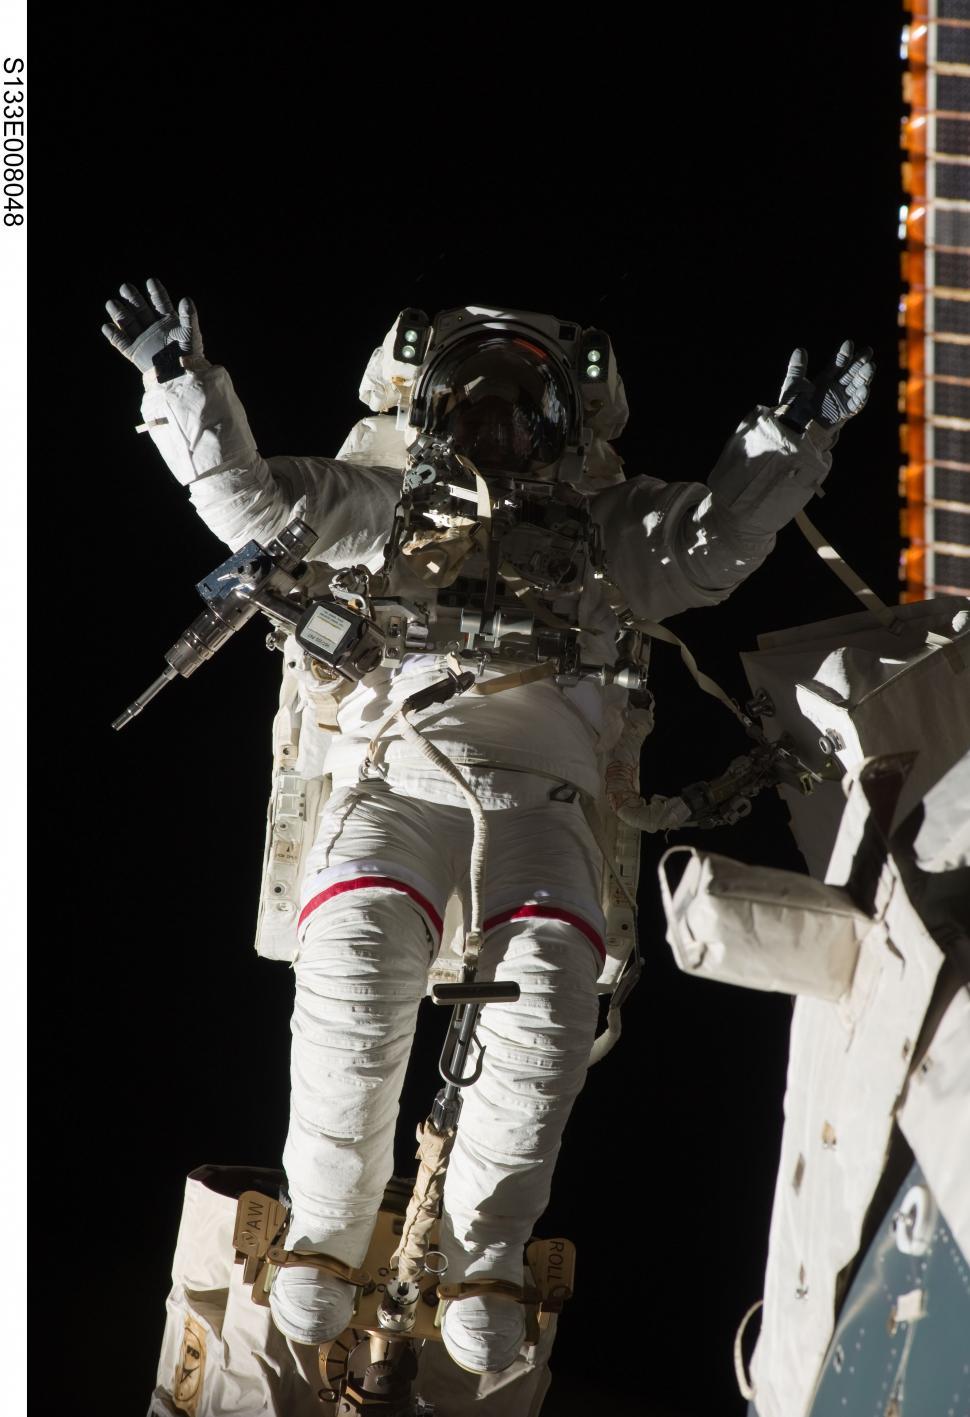 Free Image of Man in White Spacesuit Standing Next to Astronaut 